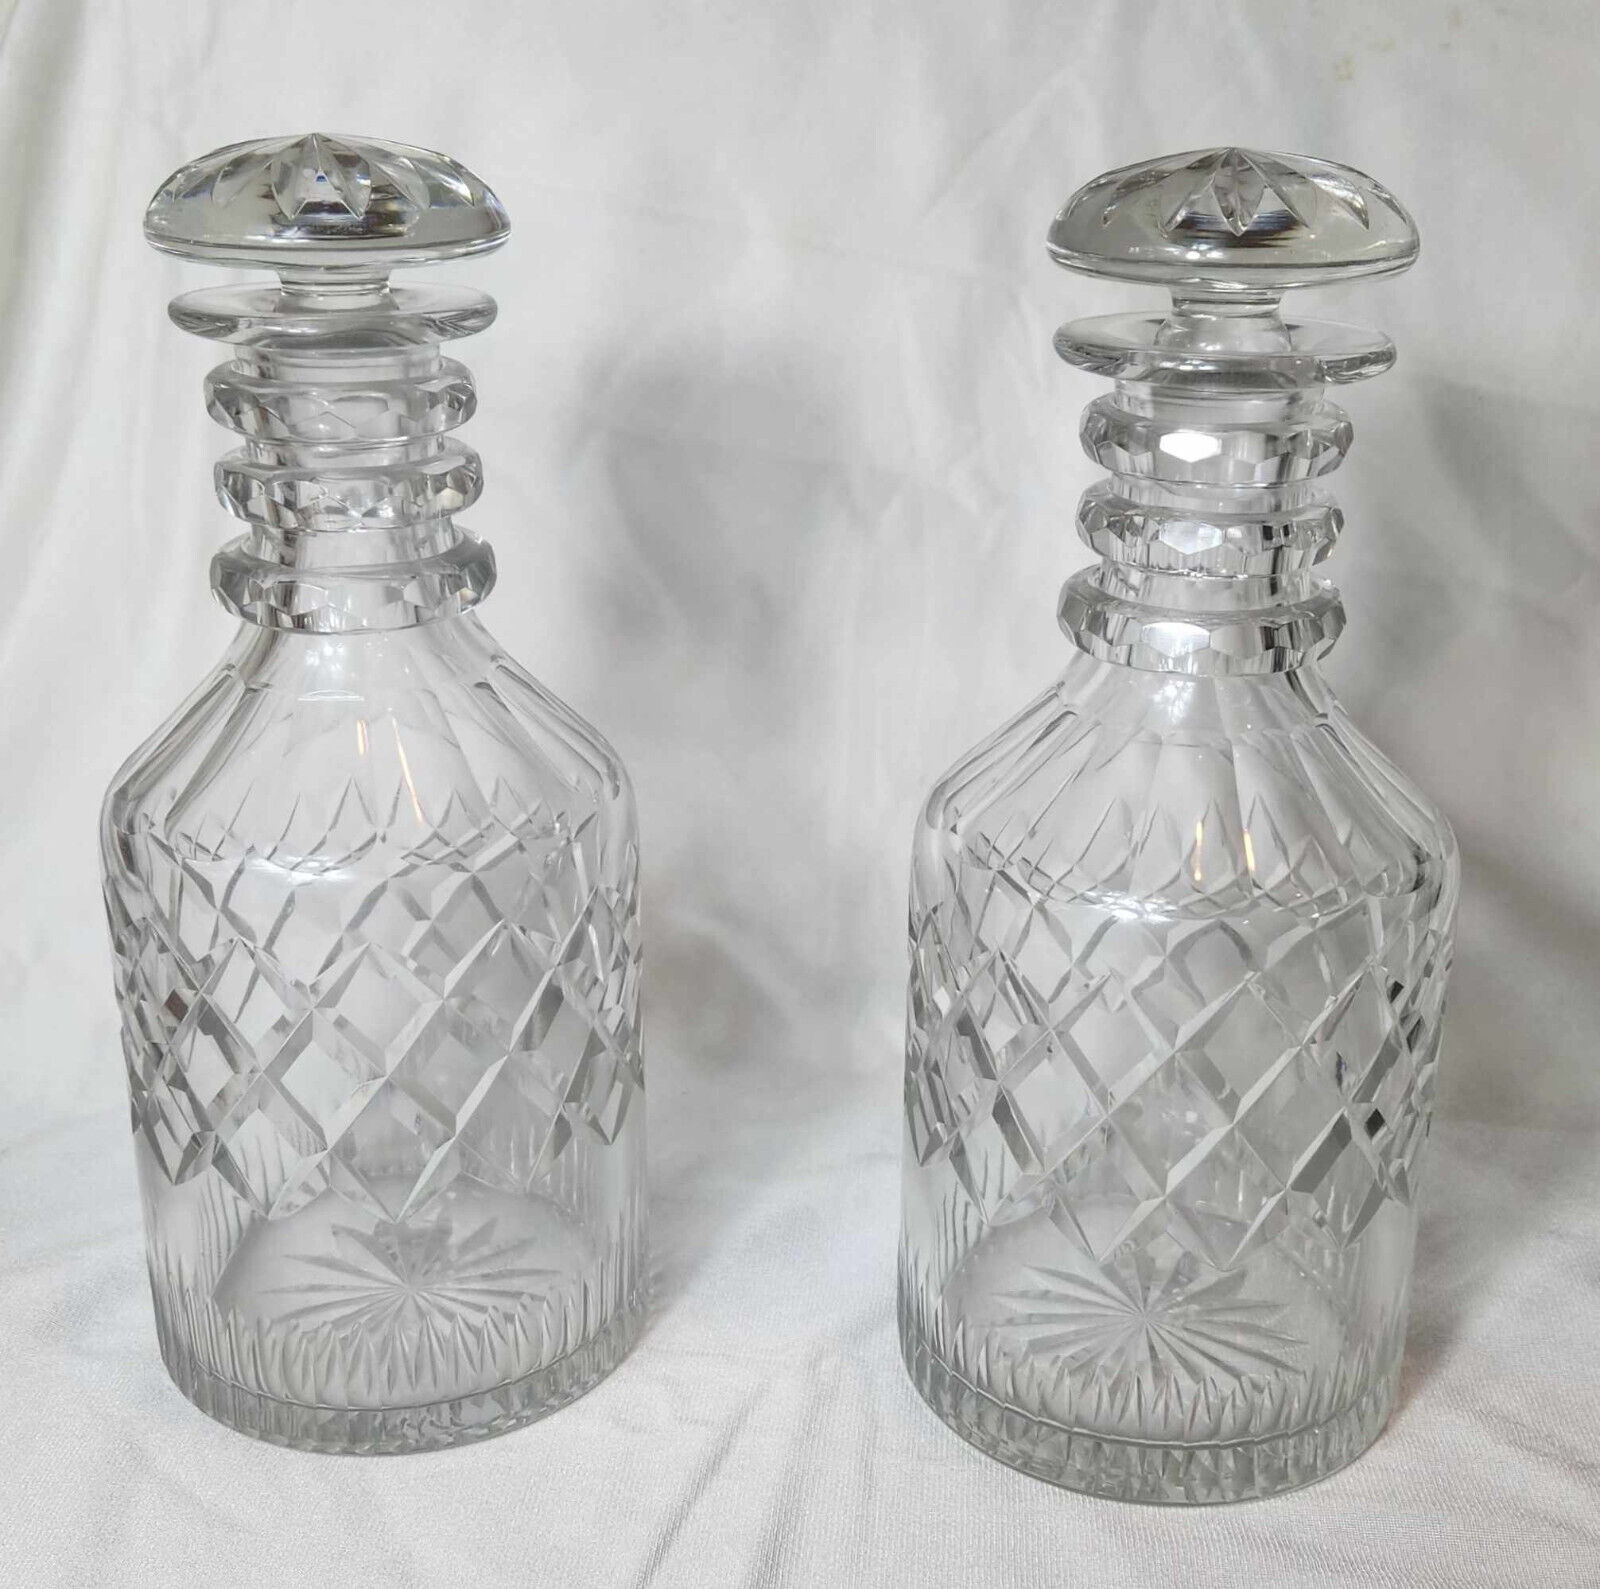 Pair of Vintage Antique Clear Crystal Decanters 3 Ring Mushroom Stopper